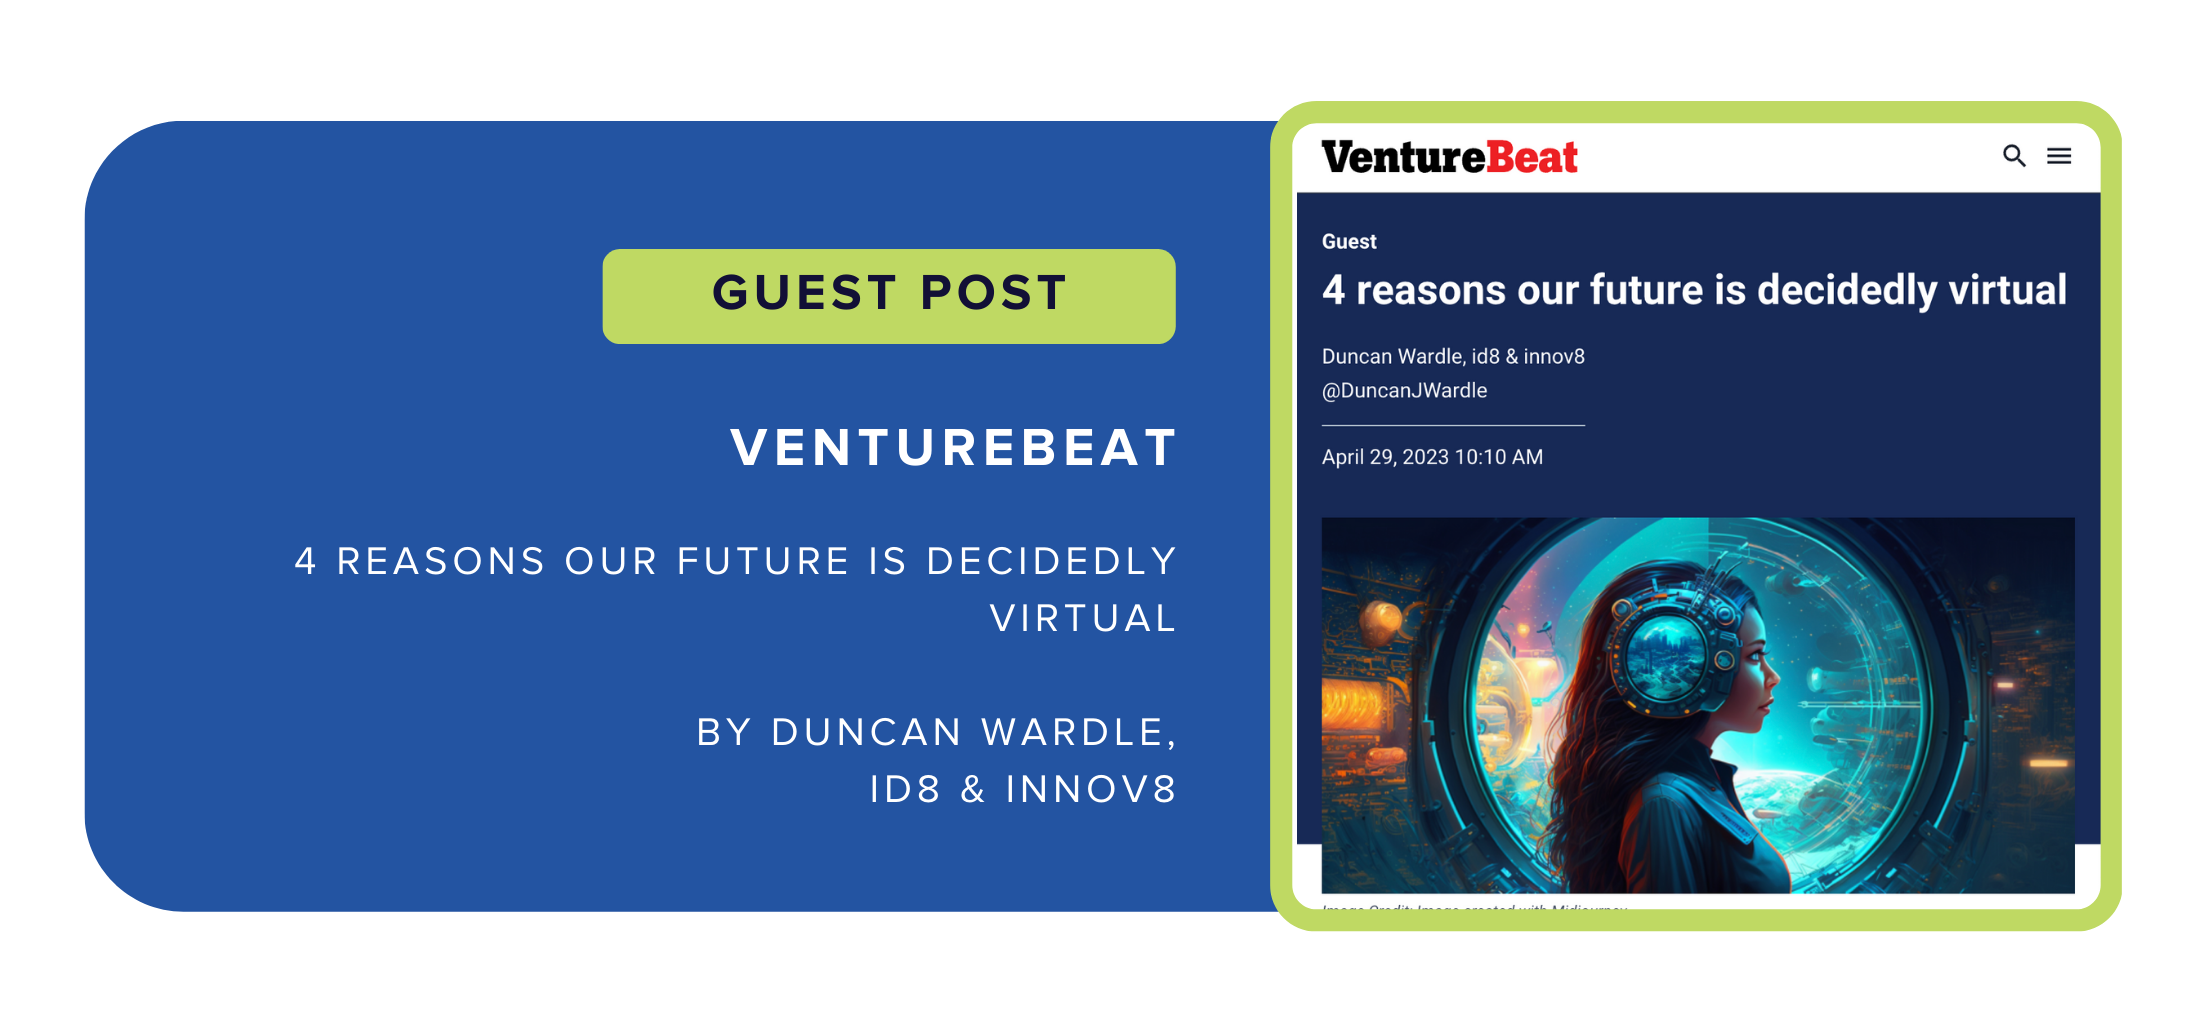 Guest Post in VentureBeat: "4 reasons our future is decidedly virtual" by Duncan Wardle, ID8 & Innov8